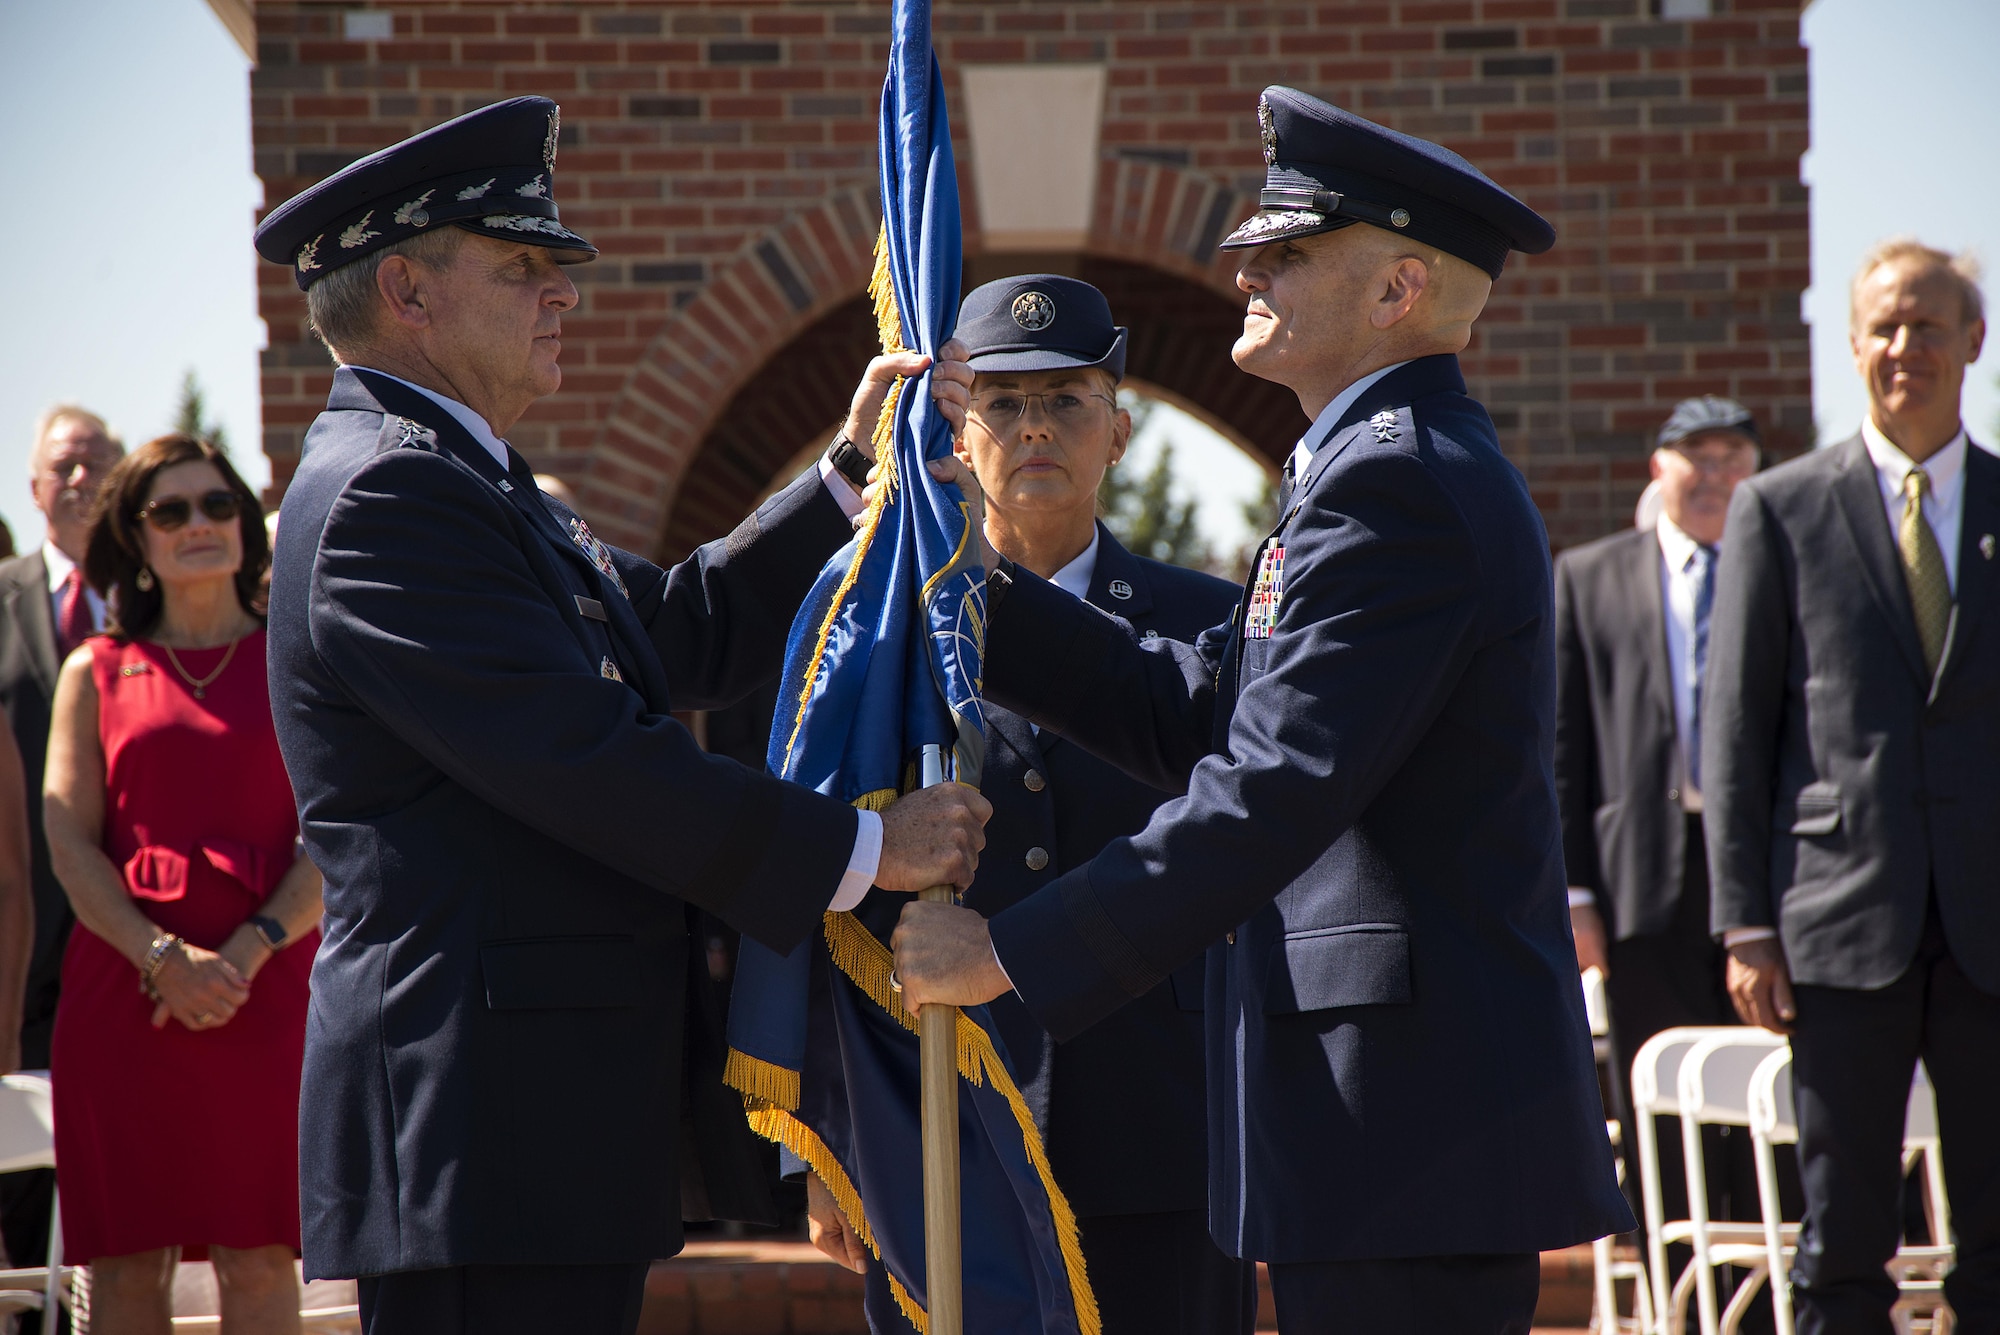 Chief of Staff of the Air Force Gen. Mark A. Welsh III passes the Air Mobility Command guidon to Gen. Carlton D. Everhart II during the AMC change of command ceremony at Scott Air Force Base, Ill., Aug. 11, 2015. Everhart is the 12th commander of AMC since its activation June 1, 1992. (U.S. Air Force photo/Senior Airman Jake Eckhardt)